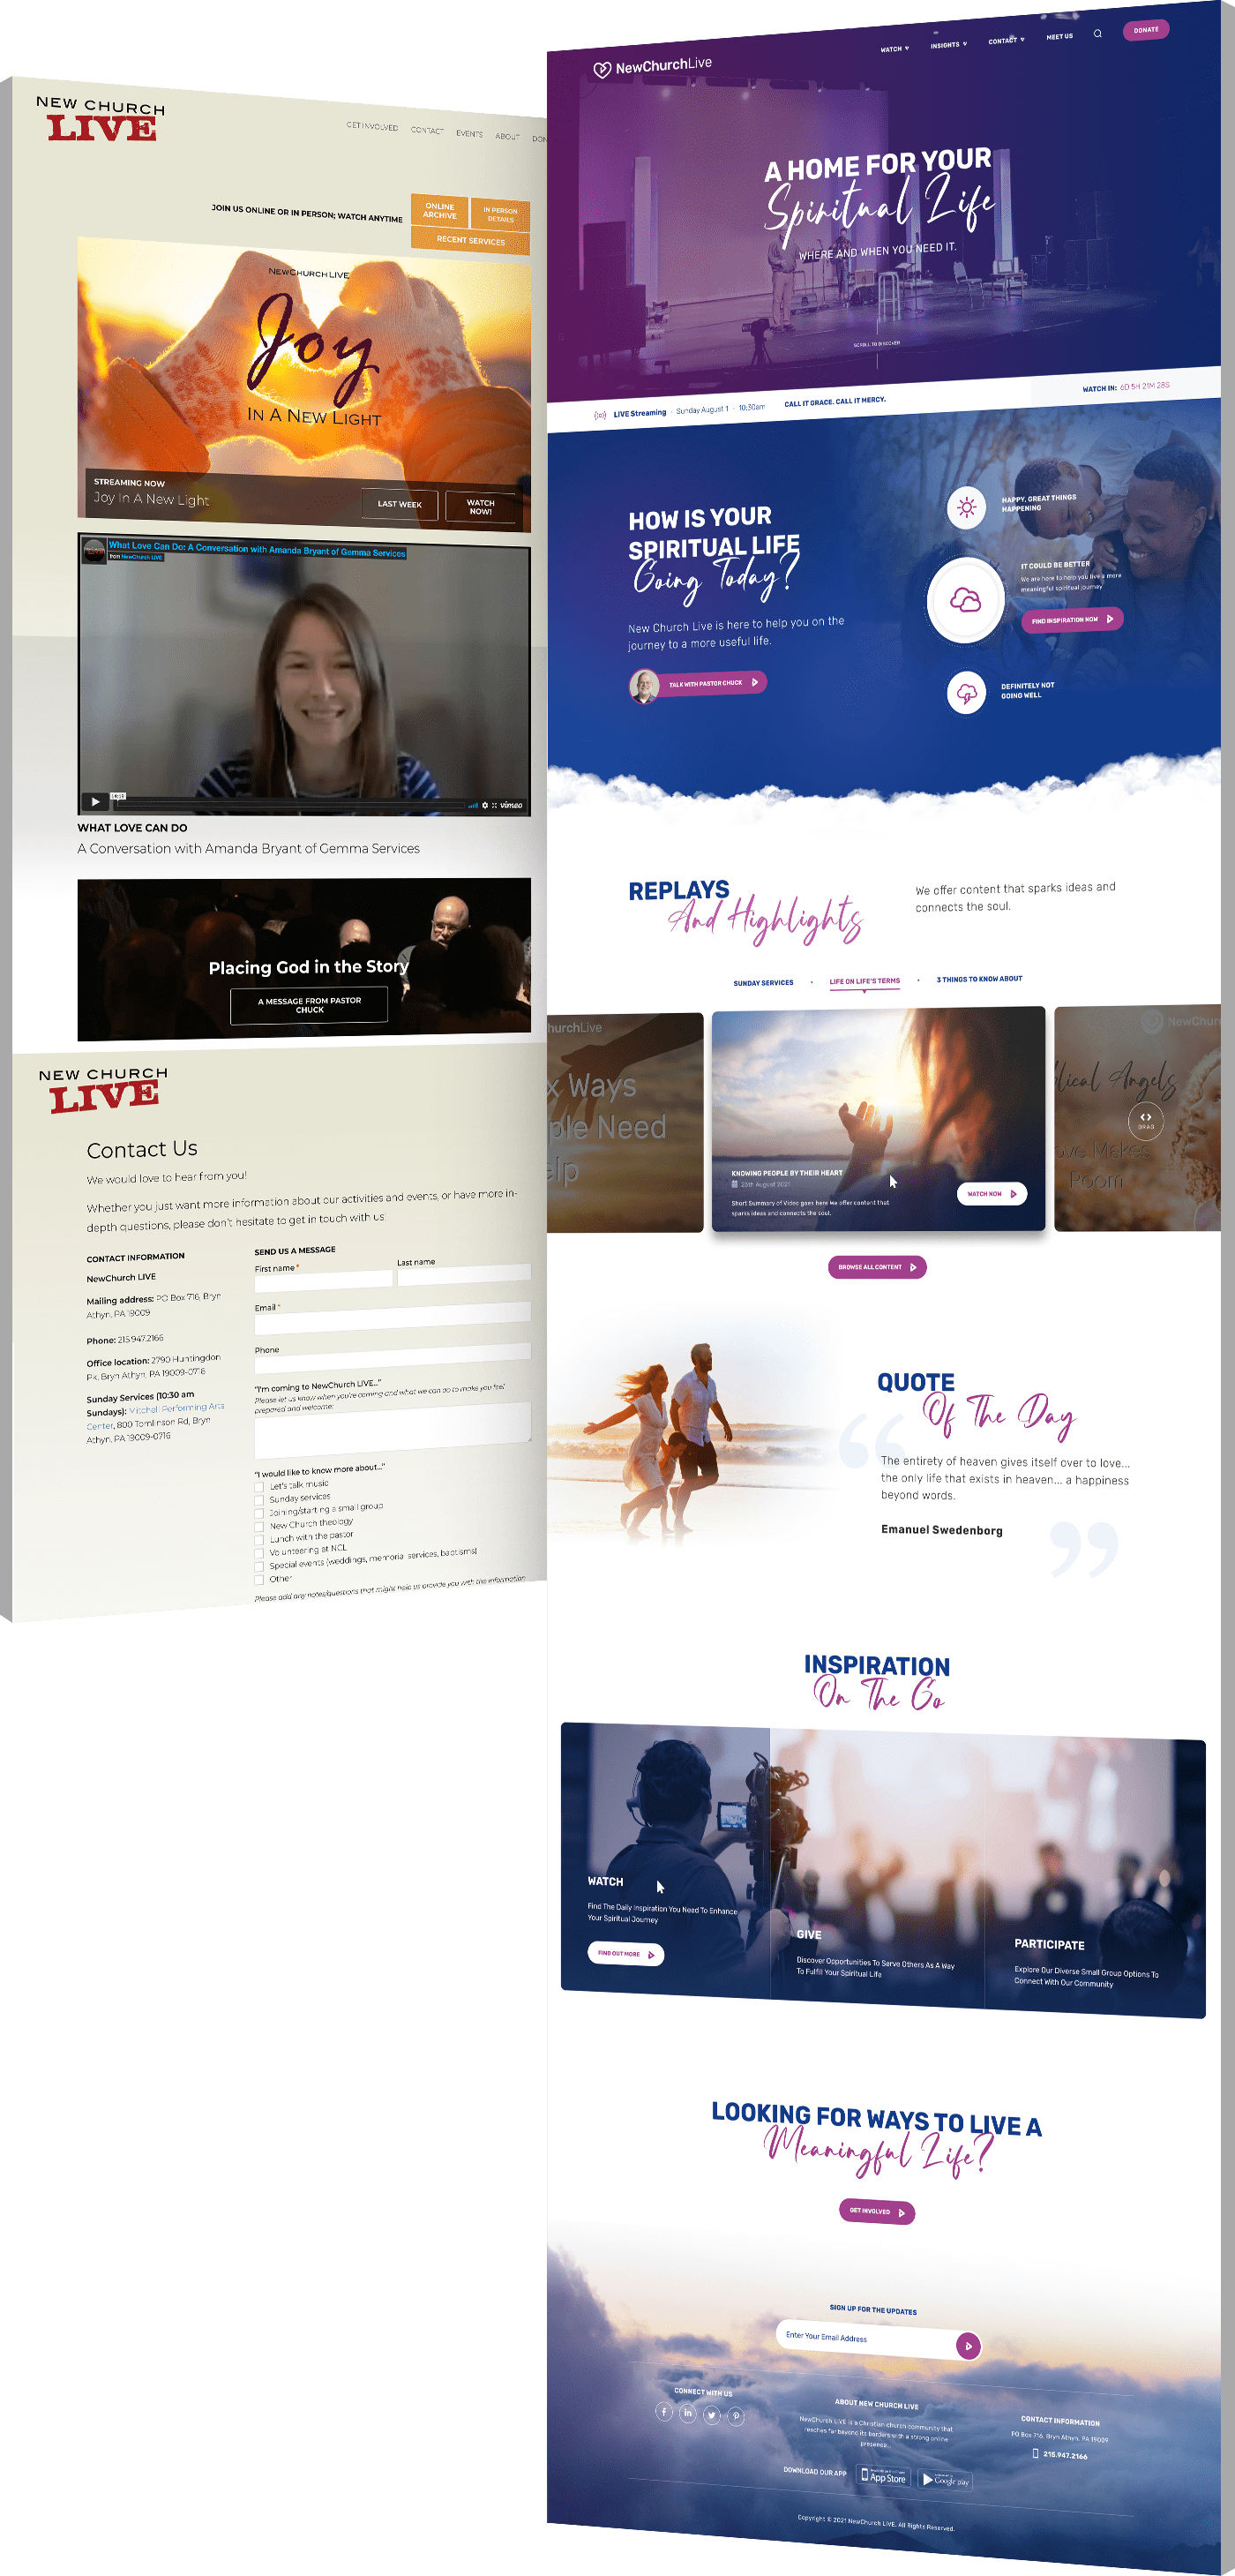 New Church website design comparison - before and after redesign